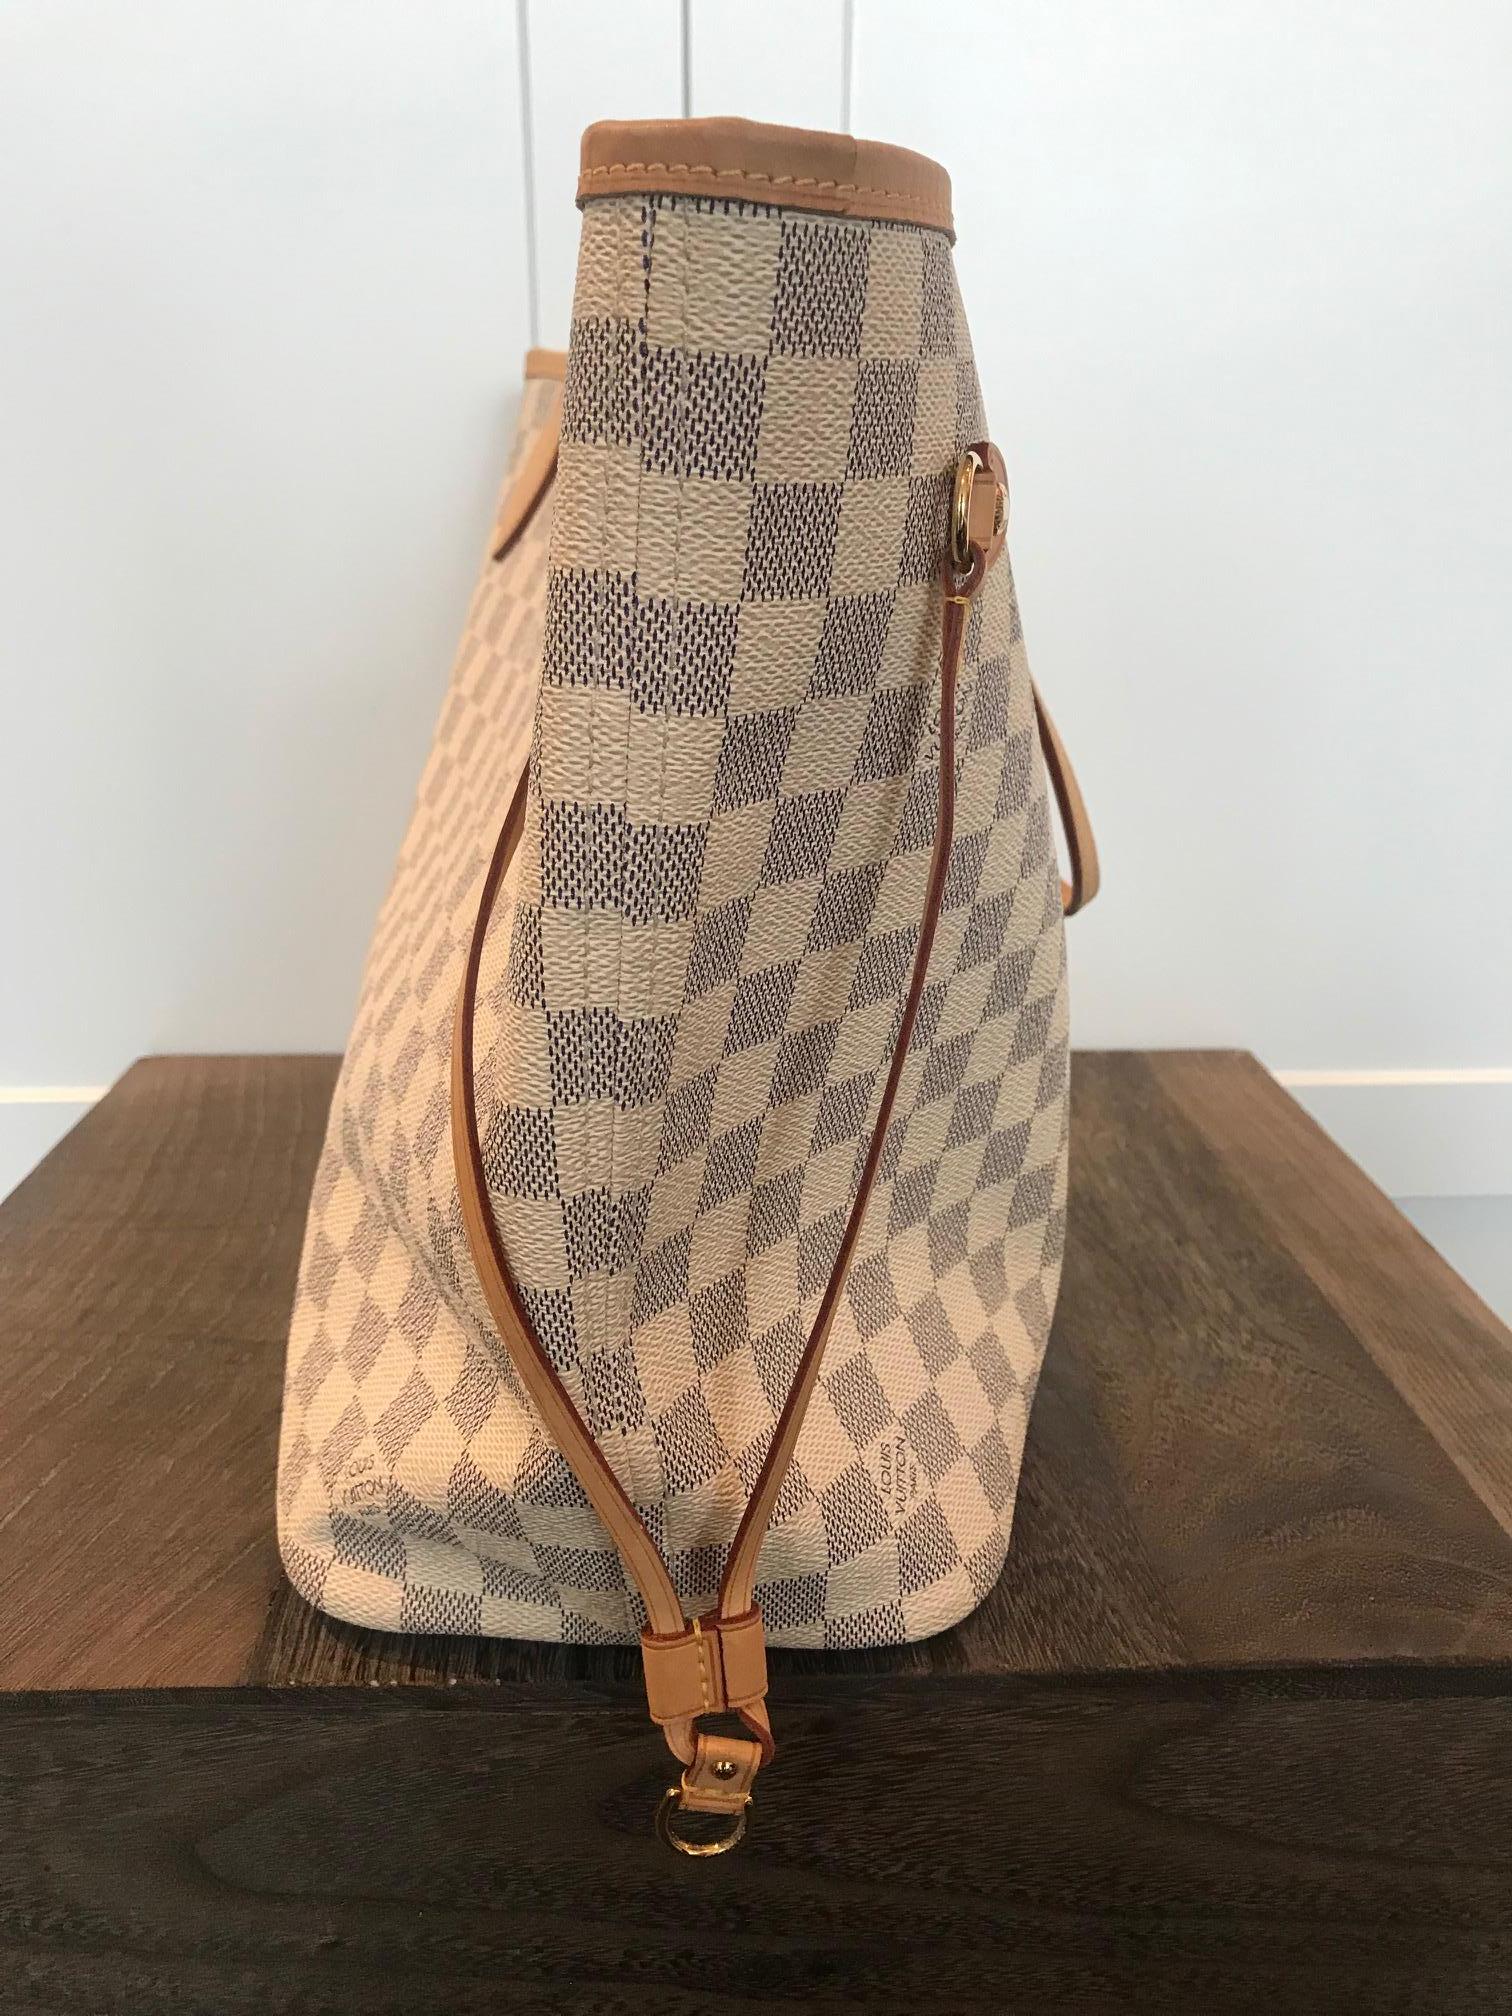 Creme and navy Damier Azur coated canvas. Brass hardware. Clasp closure at top. Dual flat shoulder straps. Tan Vachetta trim. Dual drawstring accents at sides. Creme and beige stripe print woven lining. One interior zippered pocket.